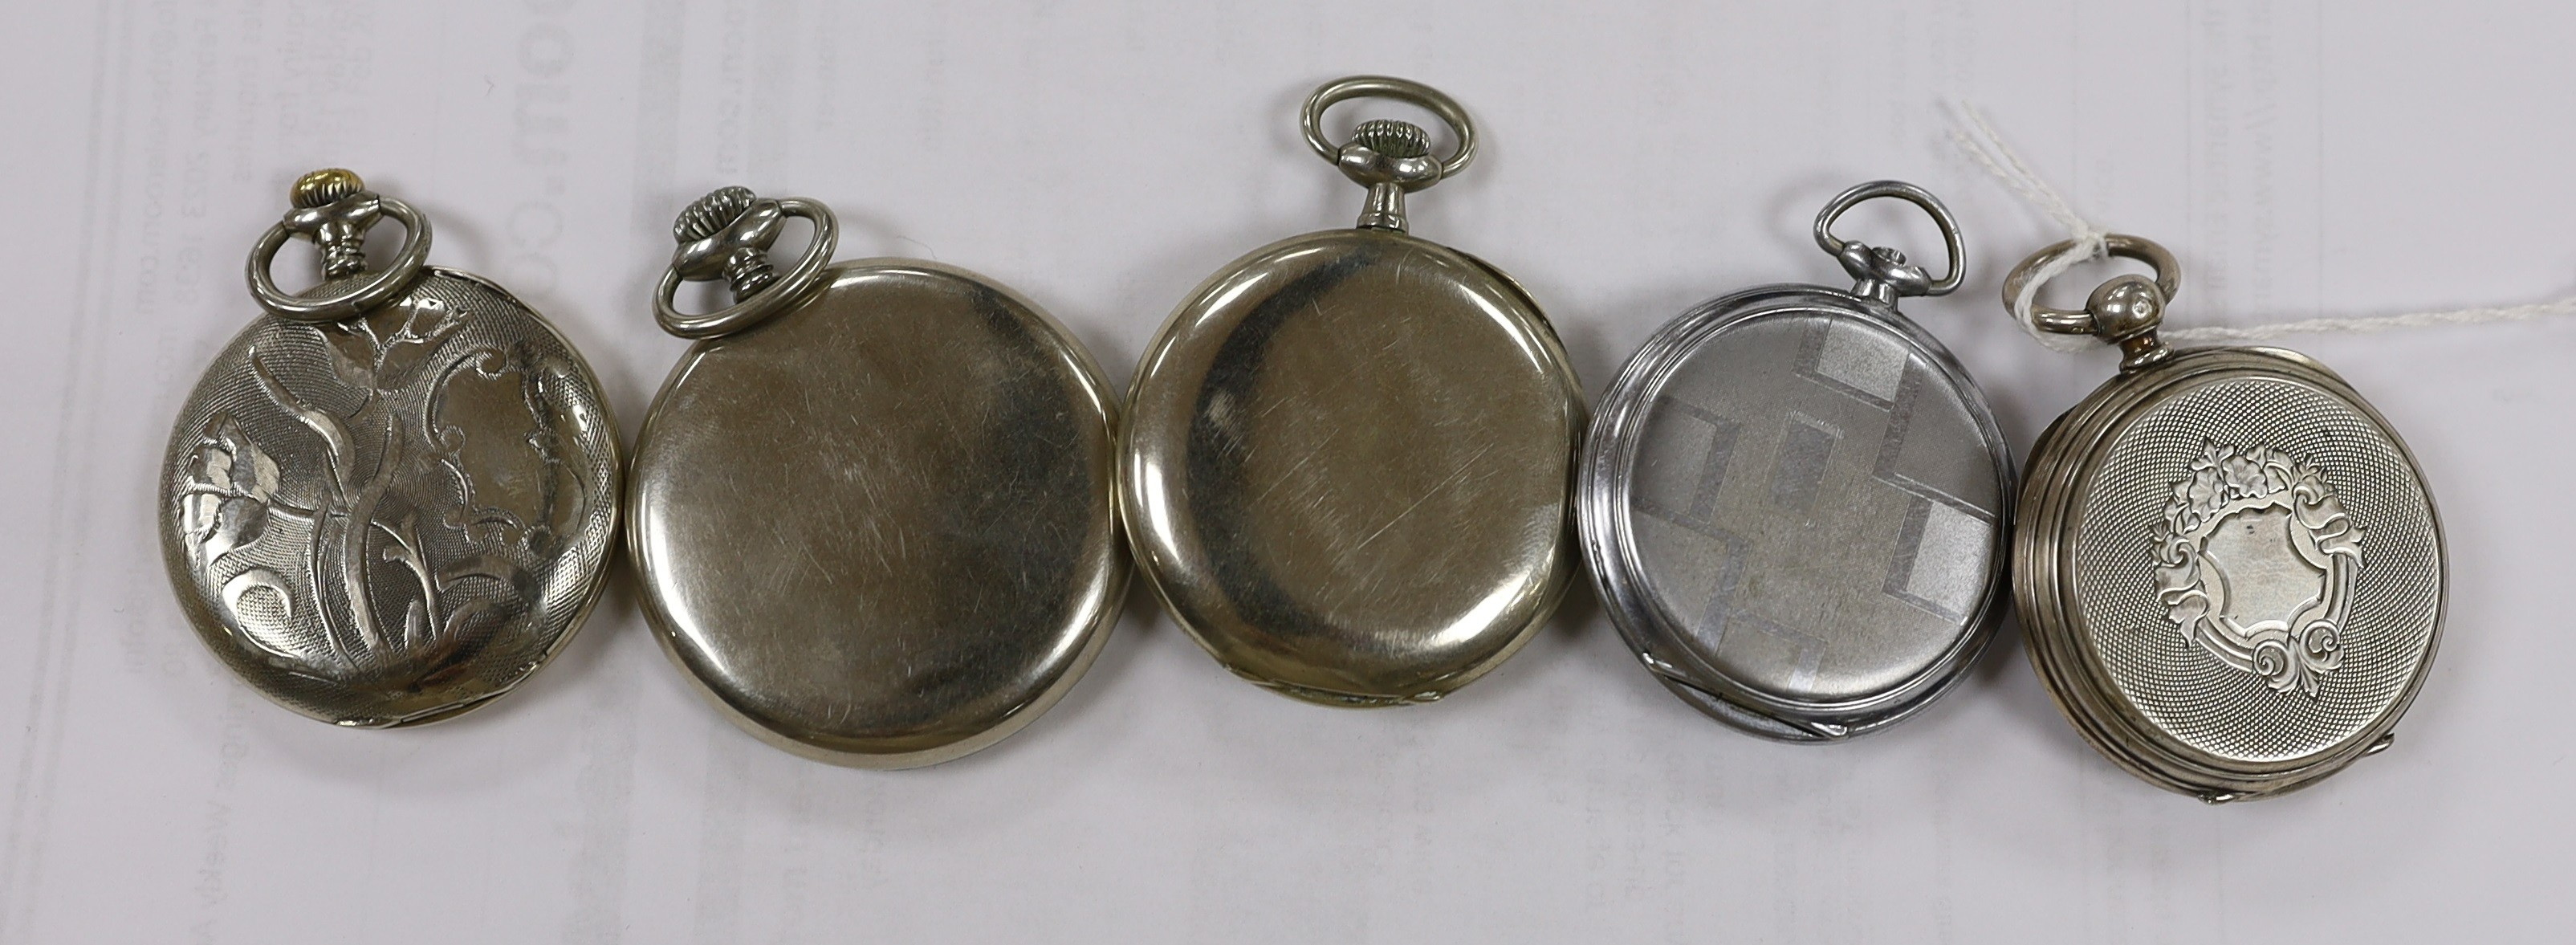 A French white metal open face keywind pocket watch, retailed by Delvallez, Horloger A Lillers and four other chrome or nickel cased pocket watches including Moeris.